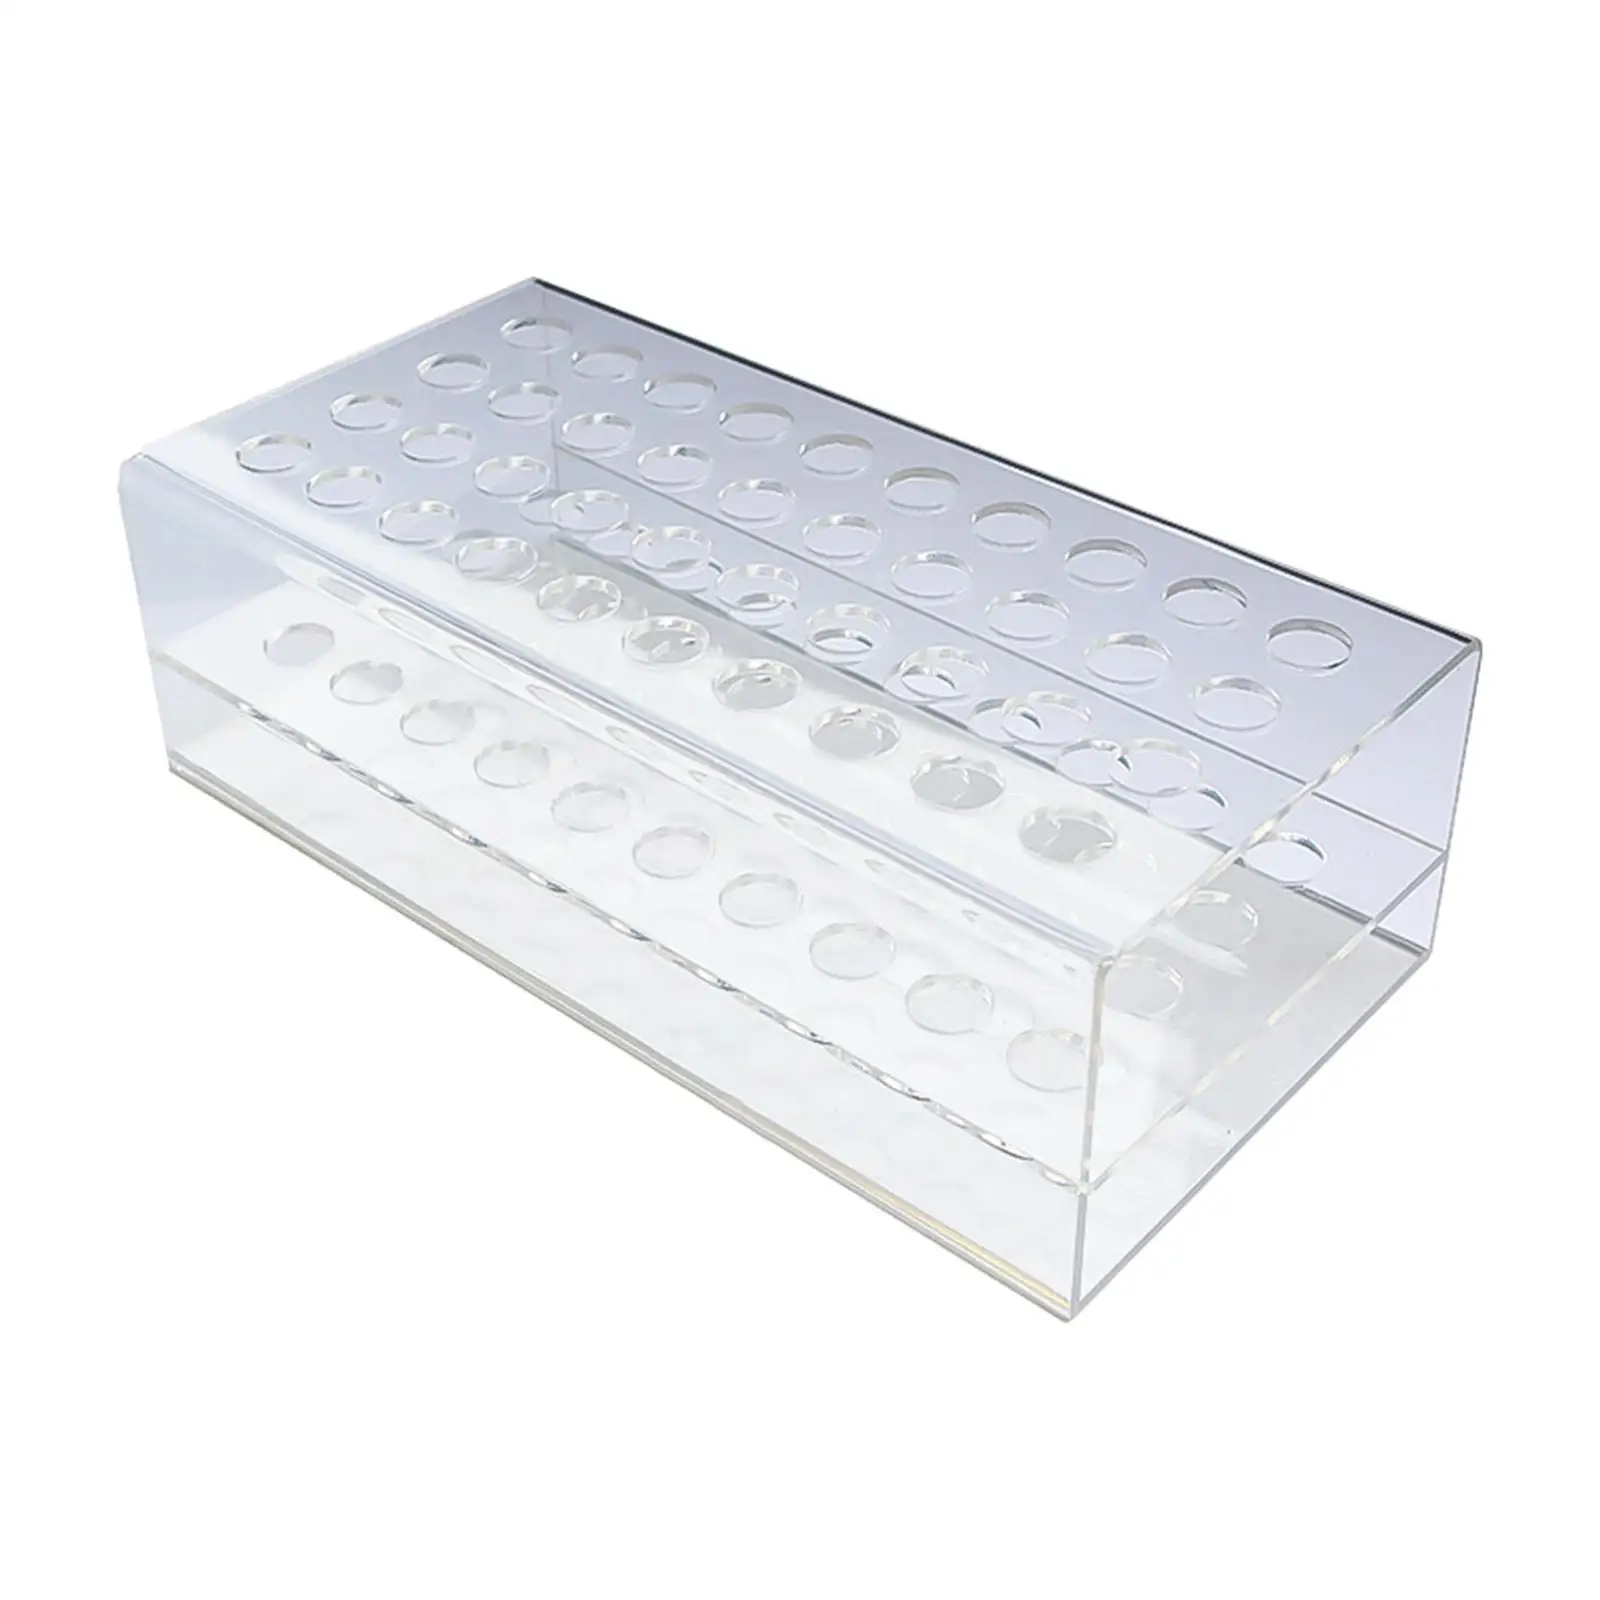 Acrylic Pen Holder Storage Box Desk Organizer 40 Hole Clear Pencil Holder for Cosmetic Brushes Store Use Home Art Studios Office